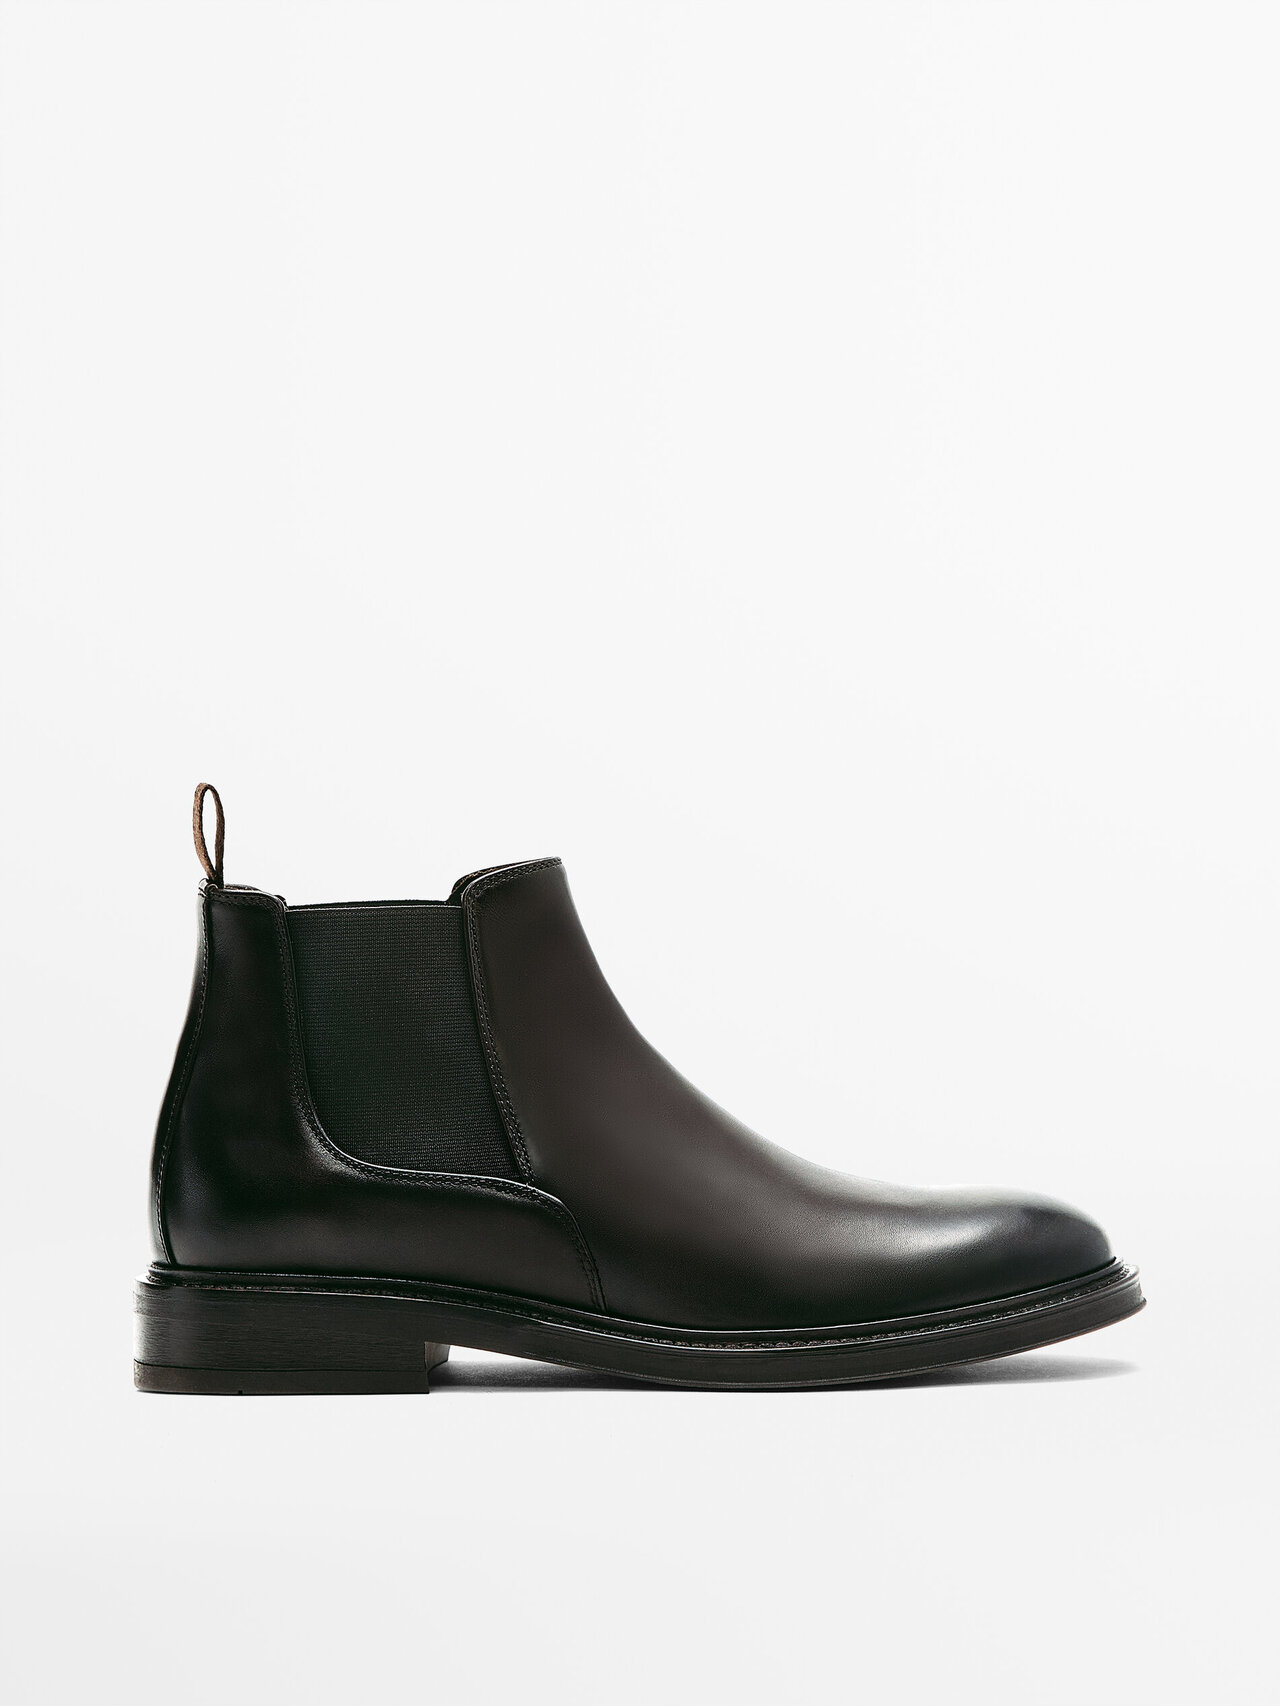 Massimo Dutti Brown Brushed Leather Chelsea Boots | ModeSens